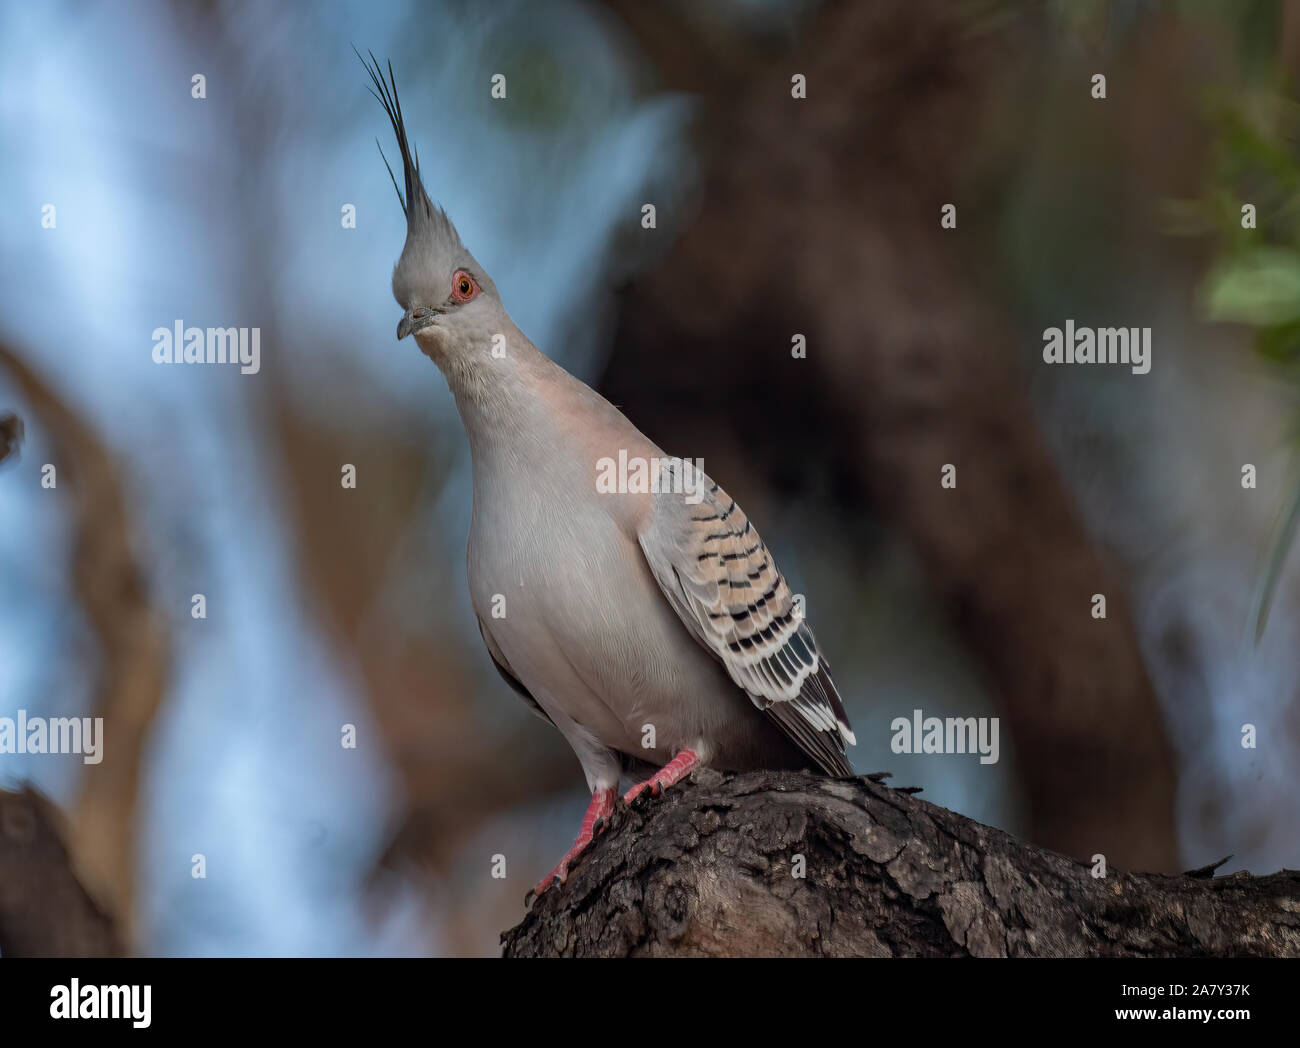 A Australian Crested Pigeon perched on a branch Stock Photo